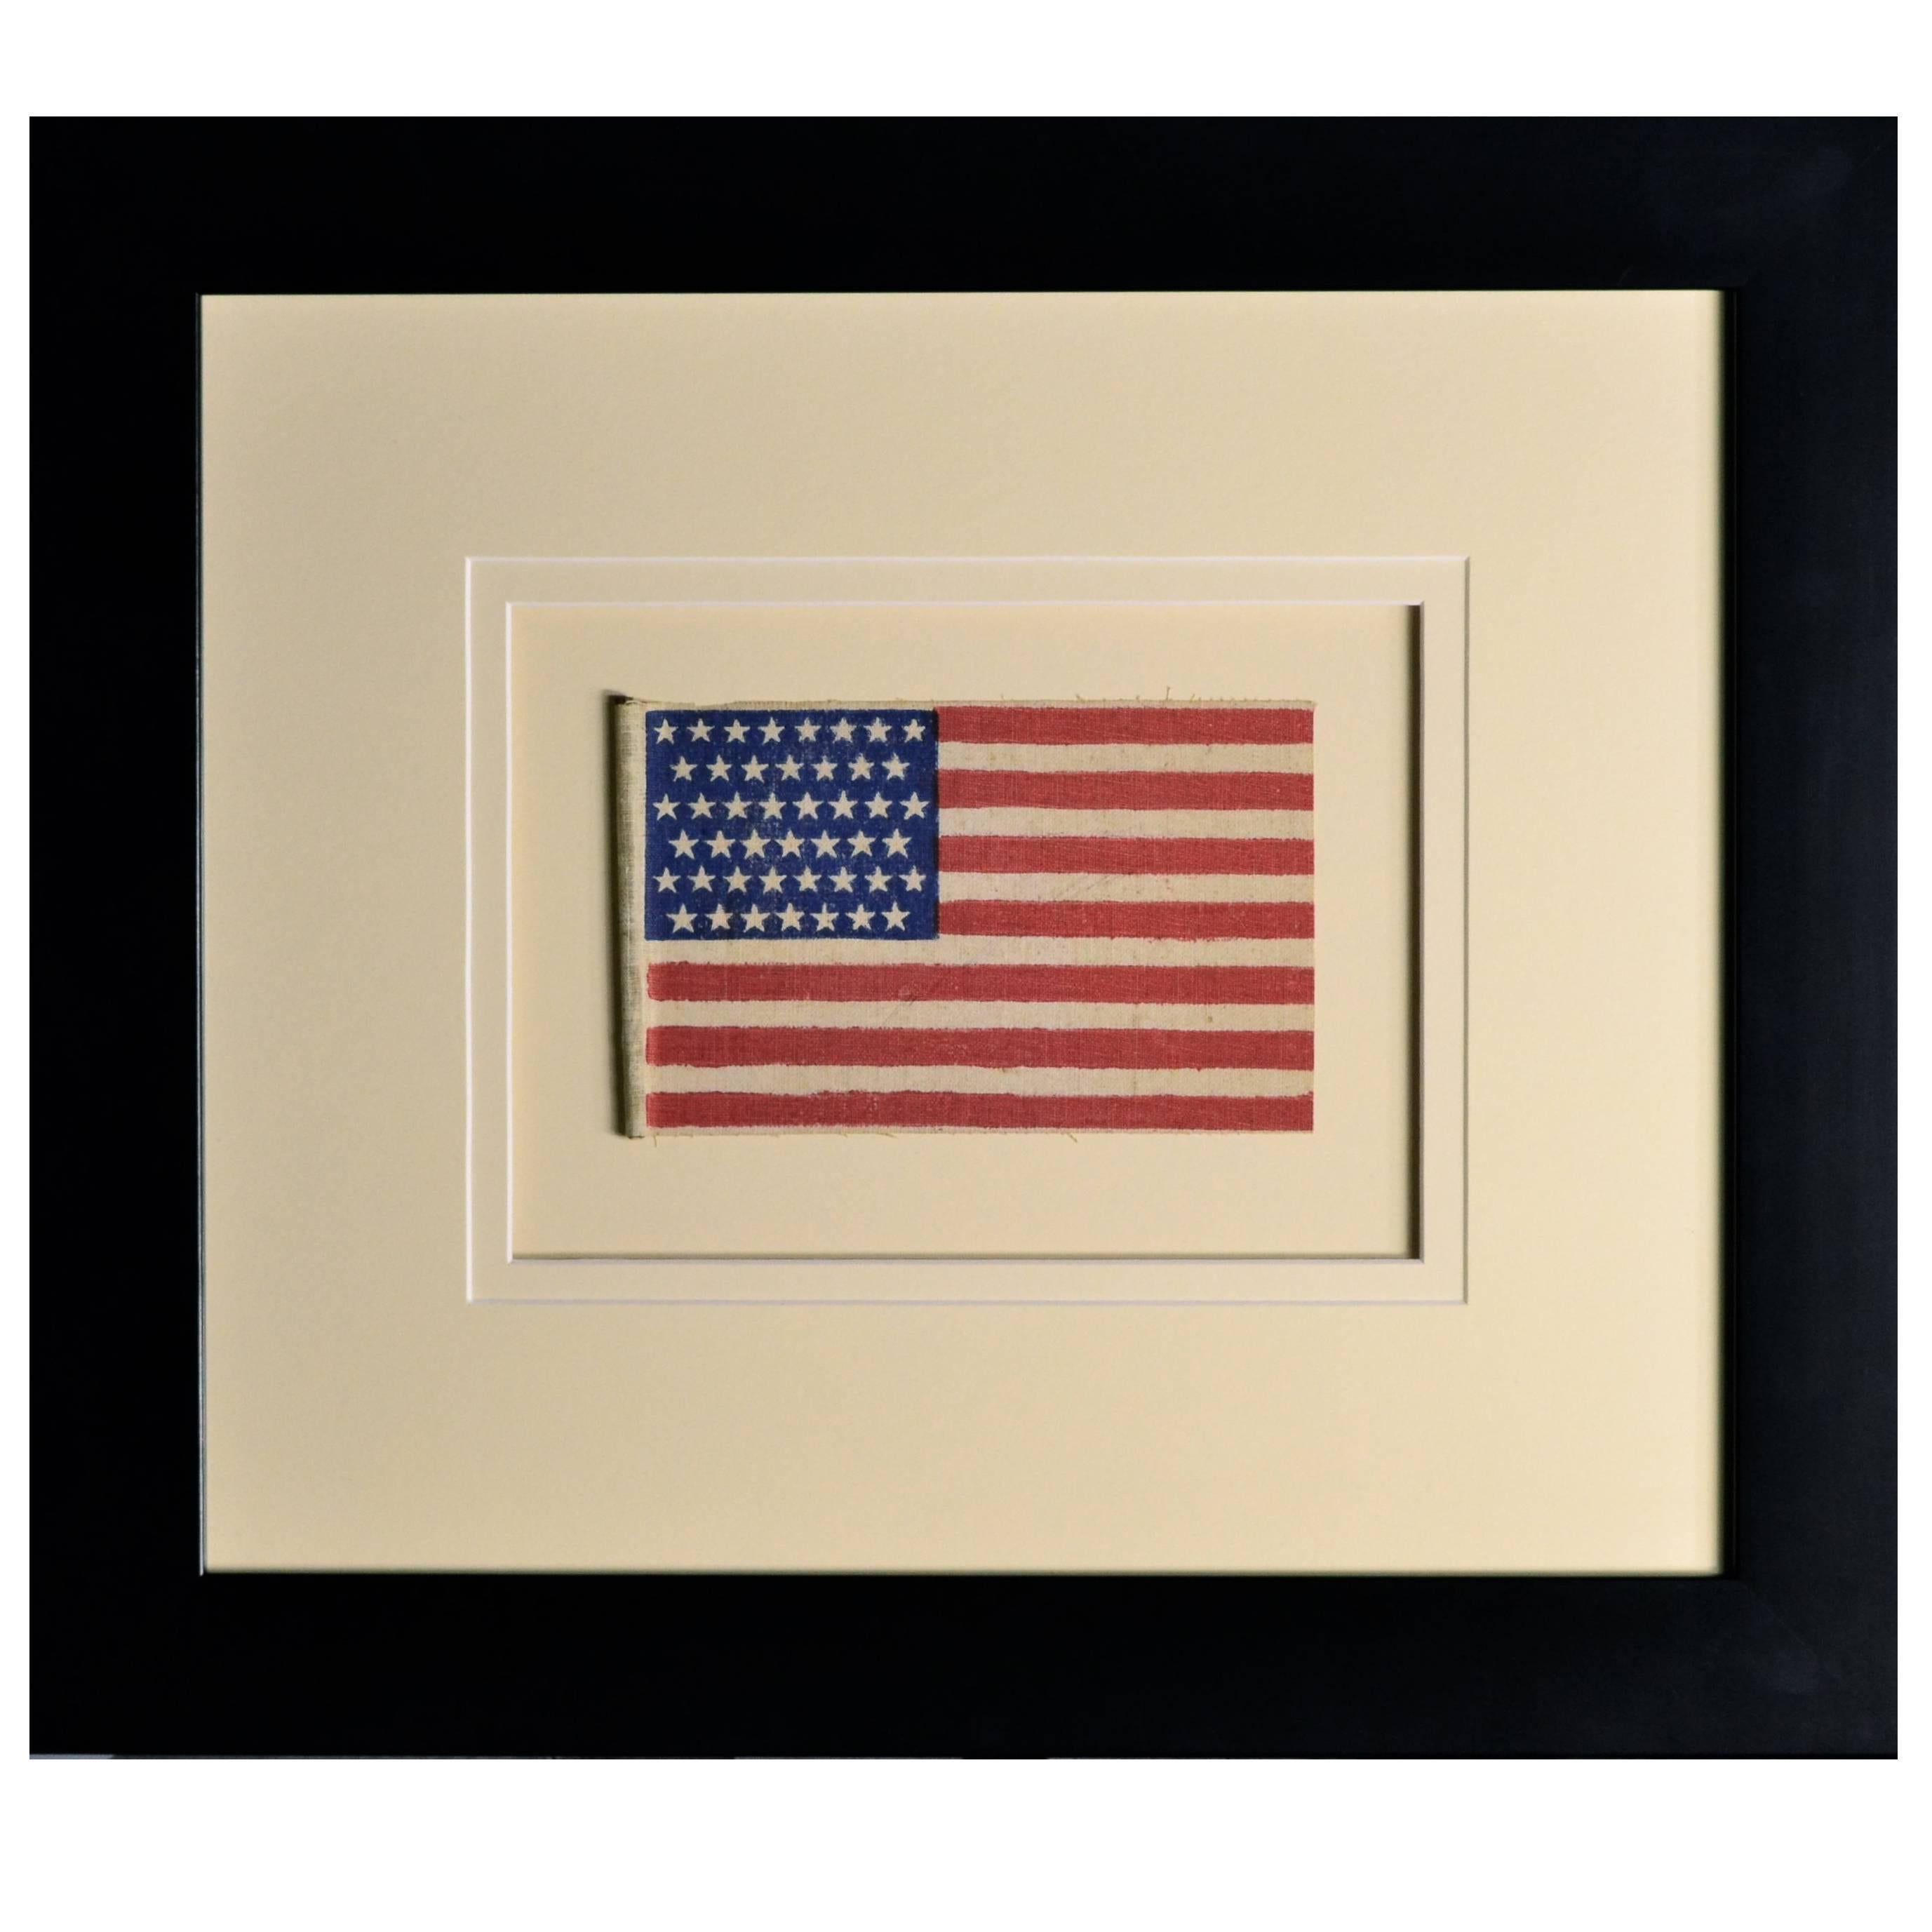 Authentic 45 Star American Flag, circa 1896 For Sale